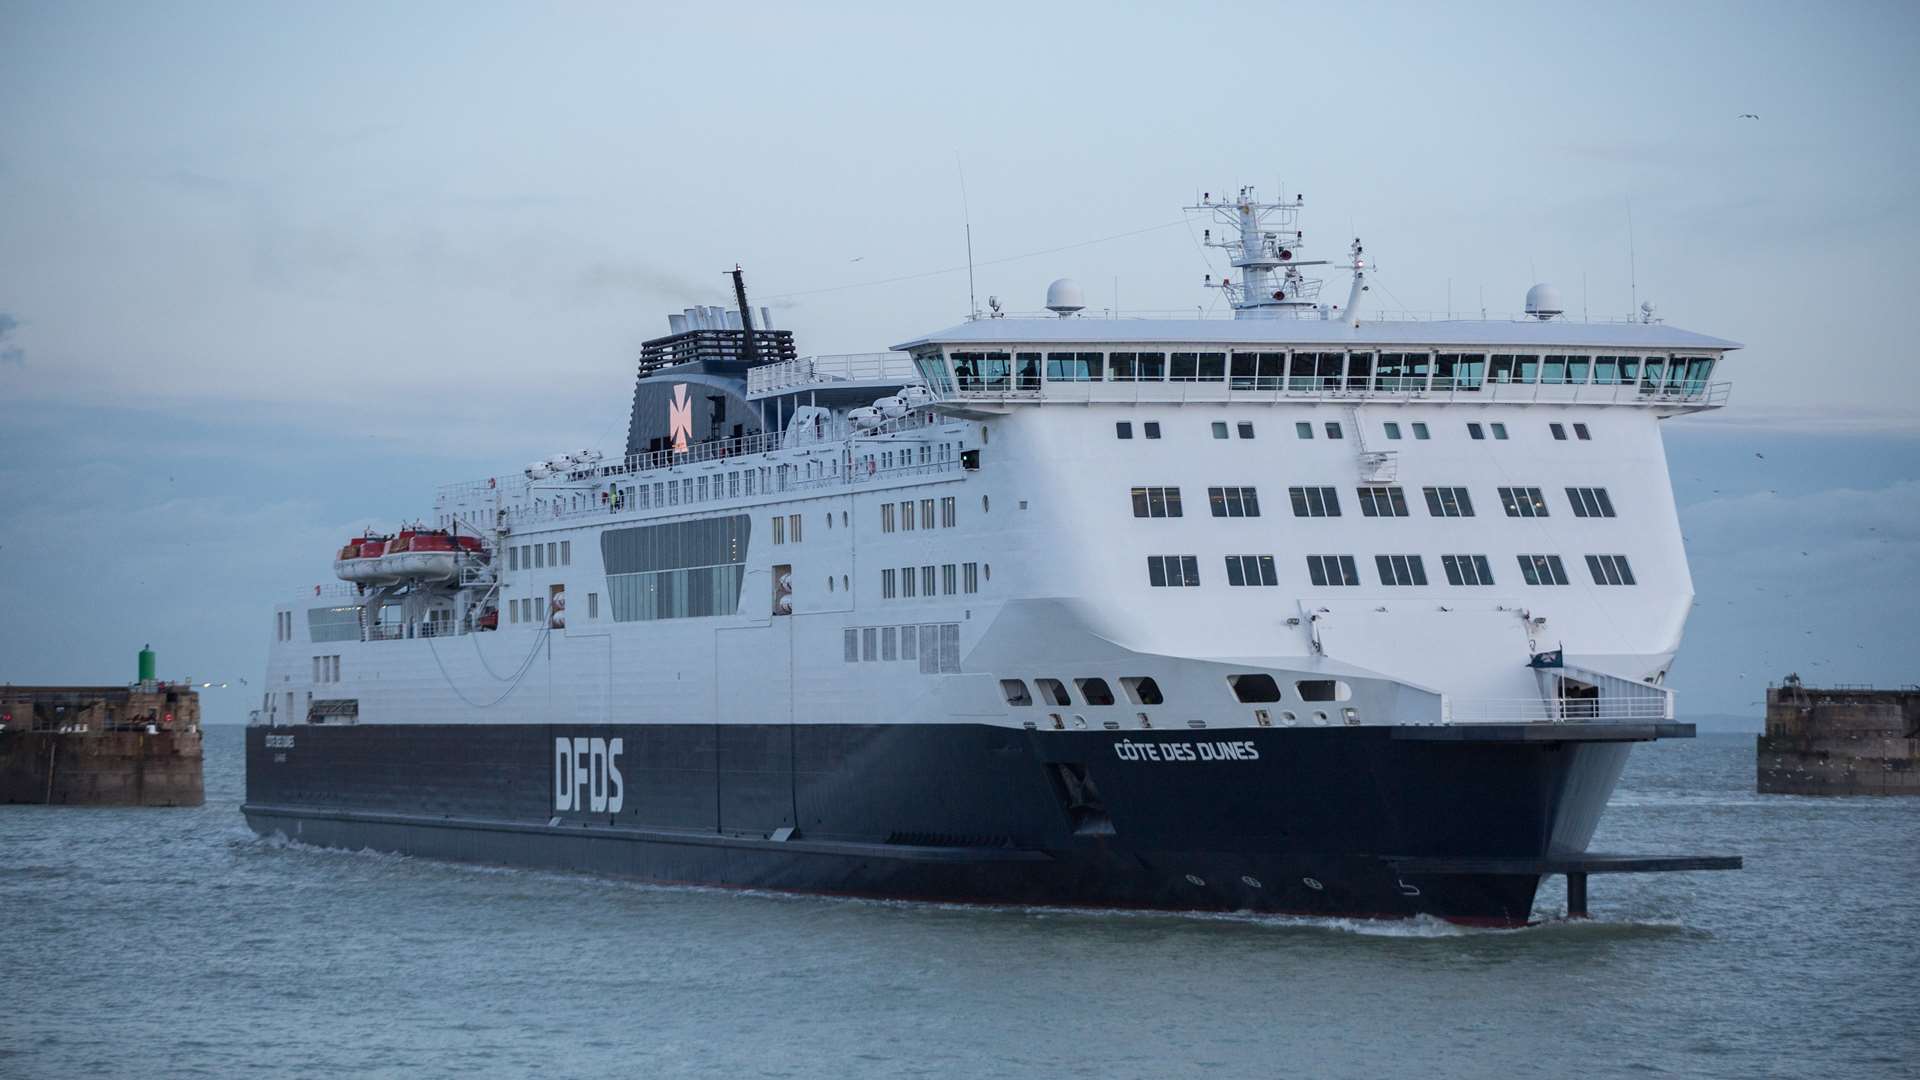 DFDS revenues have increased